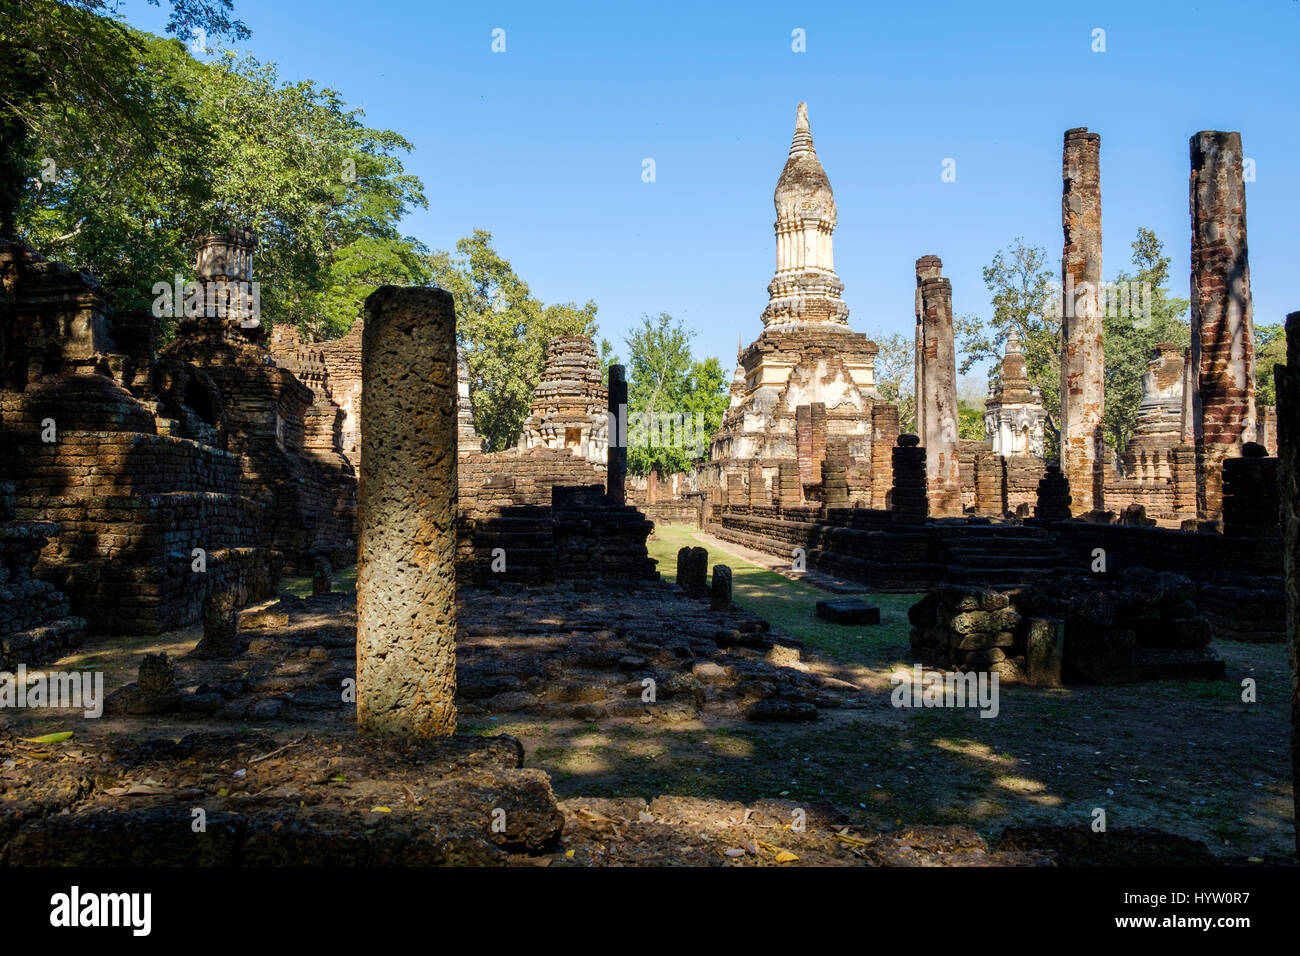 Stupa and columns at the ruins of Wat Chedi Chet Thaeo, a temple in Si Satchanalai Historical Park, Sukohthai Province, Thailand. Stock Photo